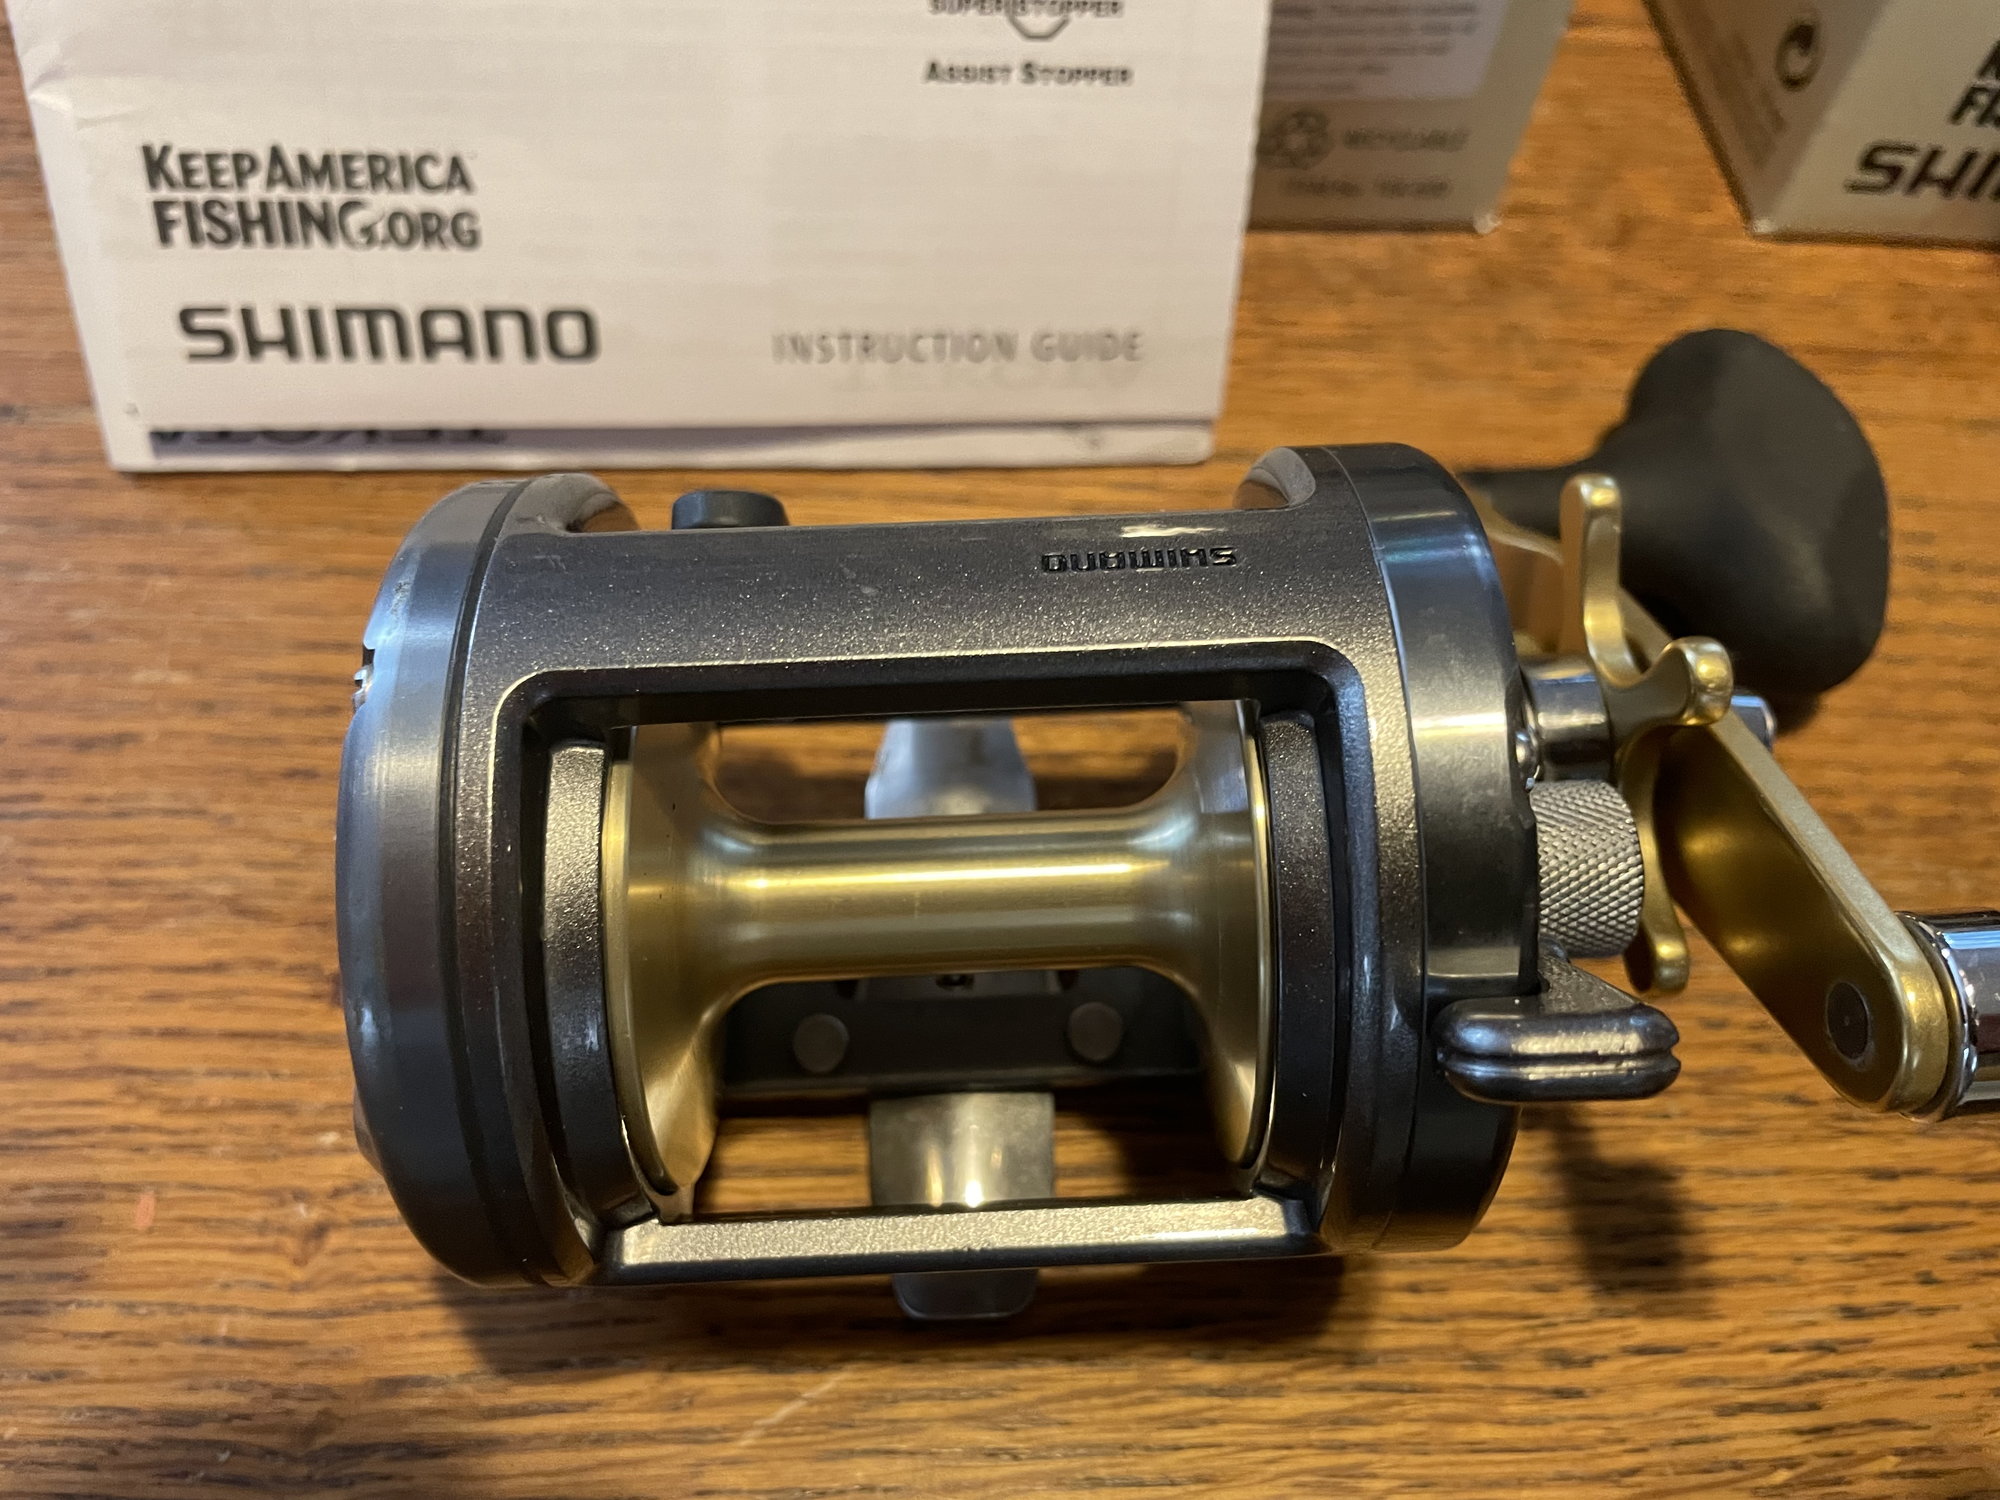 Shimano Tekota 600 pair for sale - almost perfect condition - The Hull  Truth - Boating and Fishing Forum